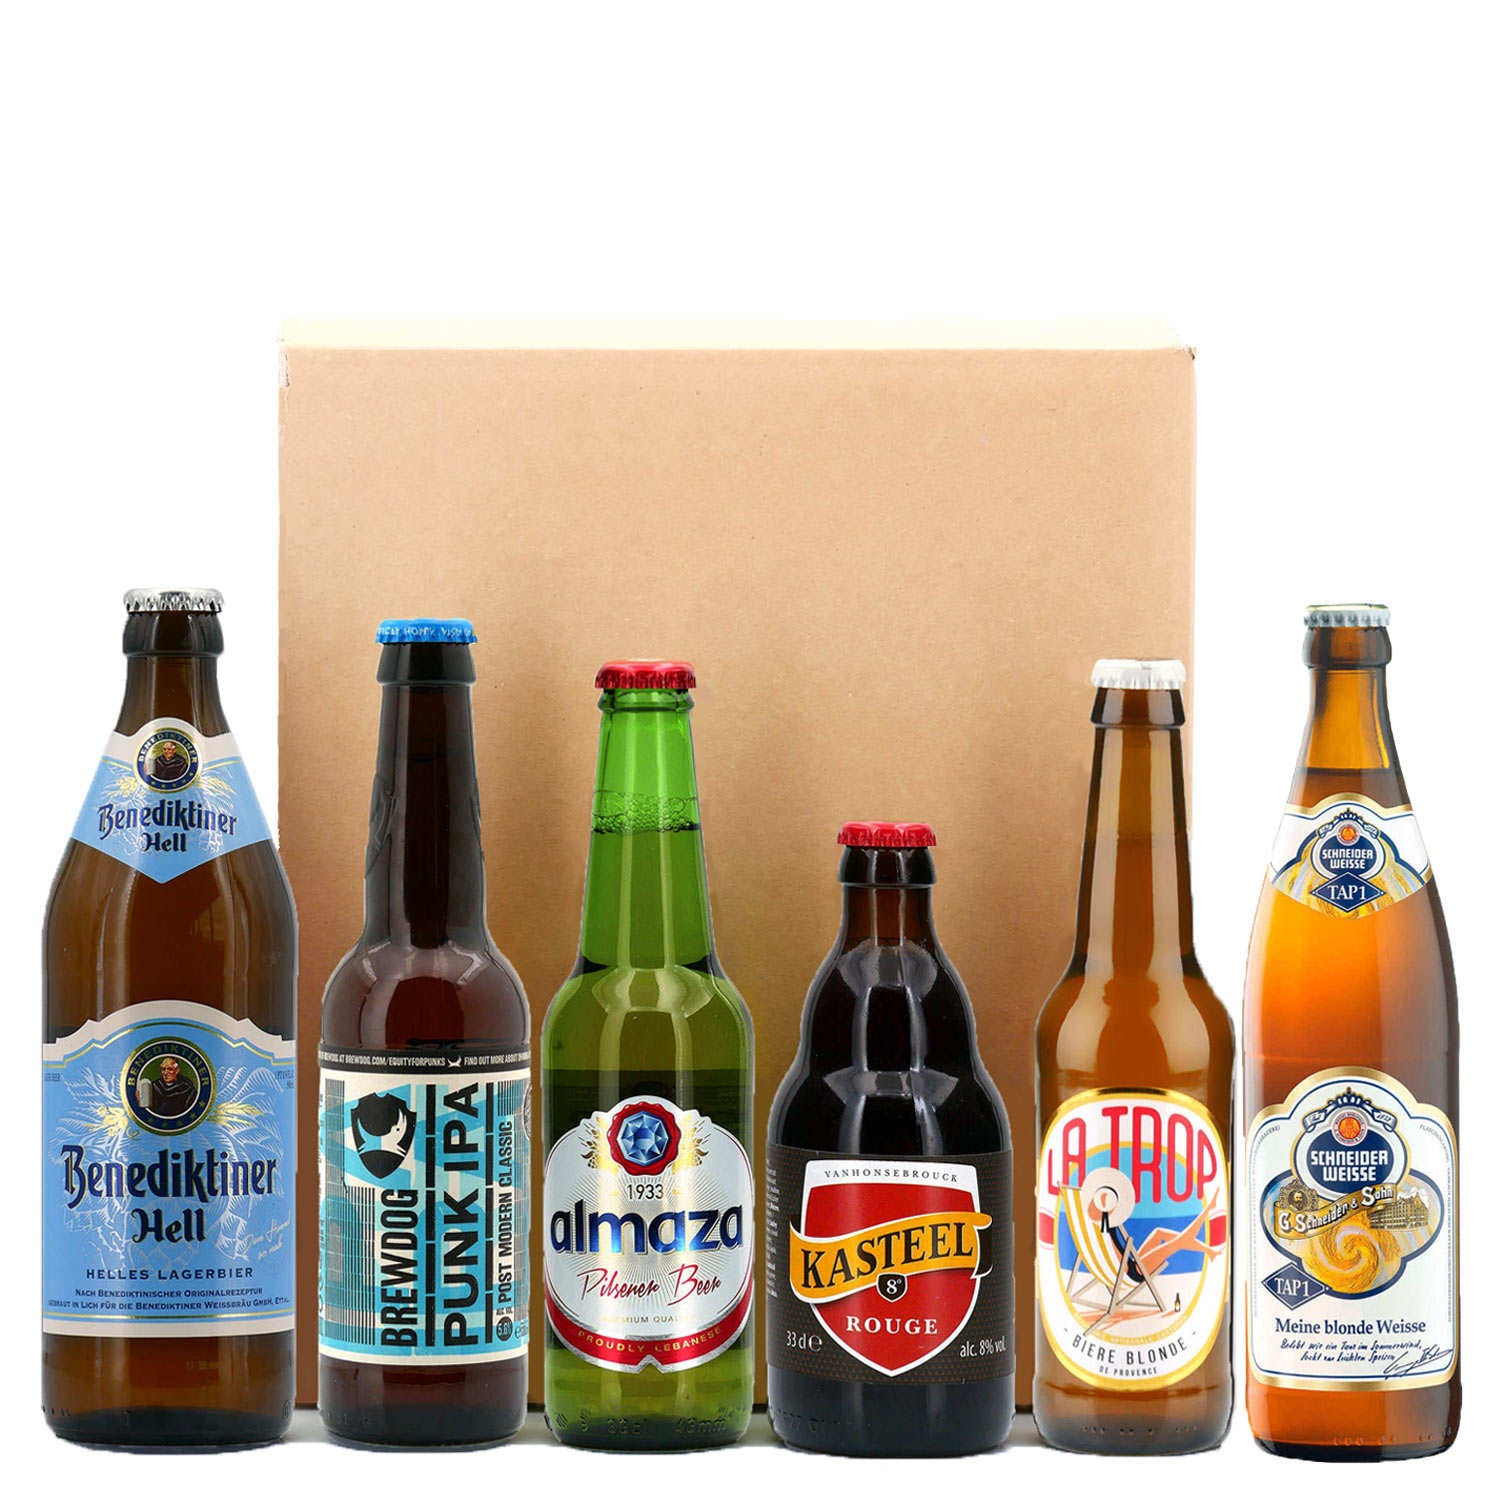 6 beer discovery box - 6 month subscription